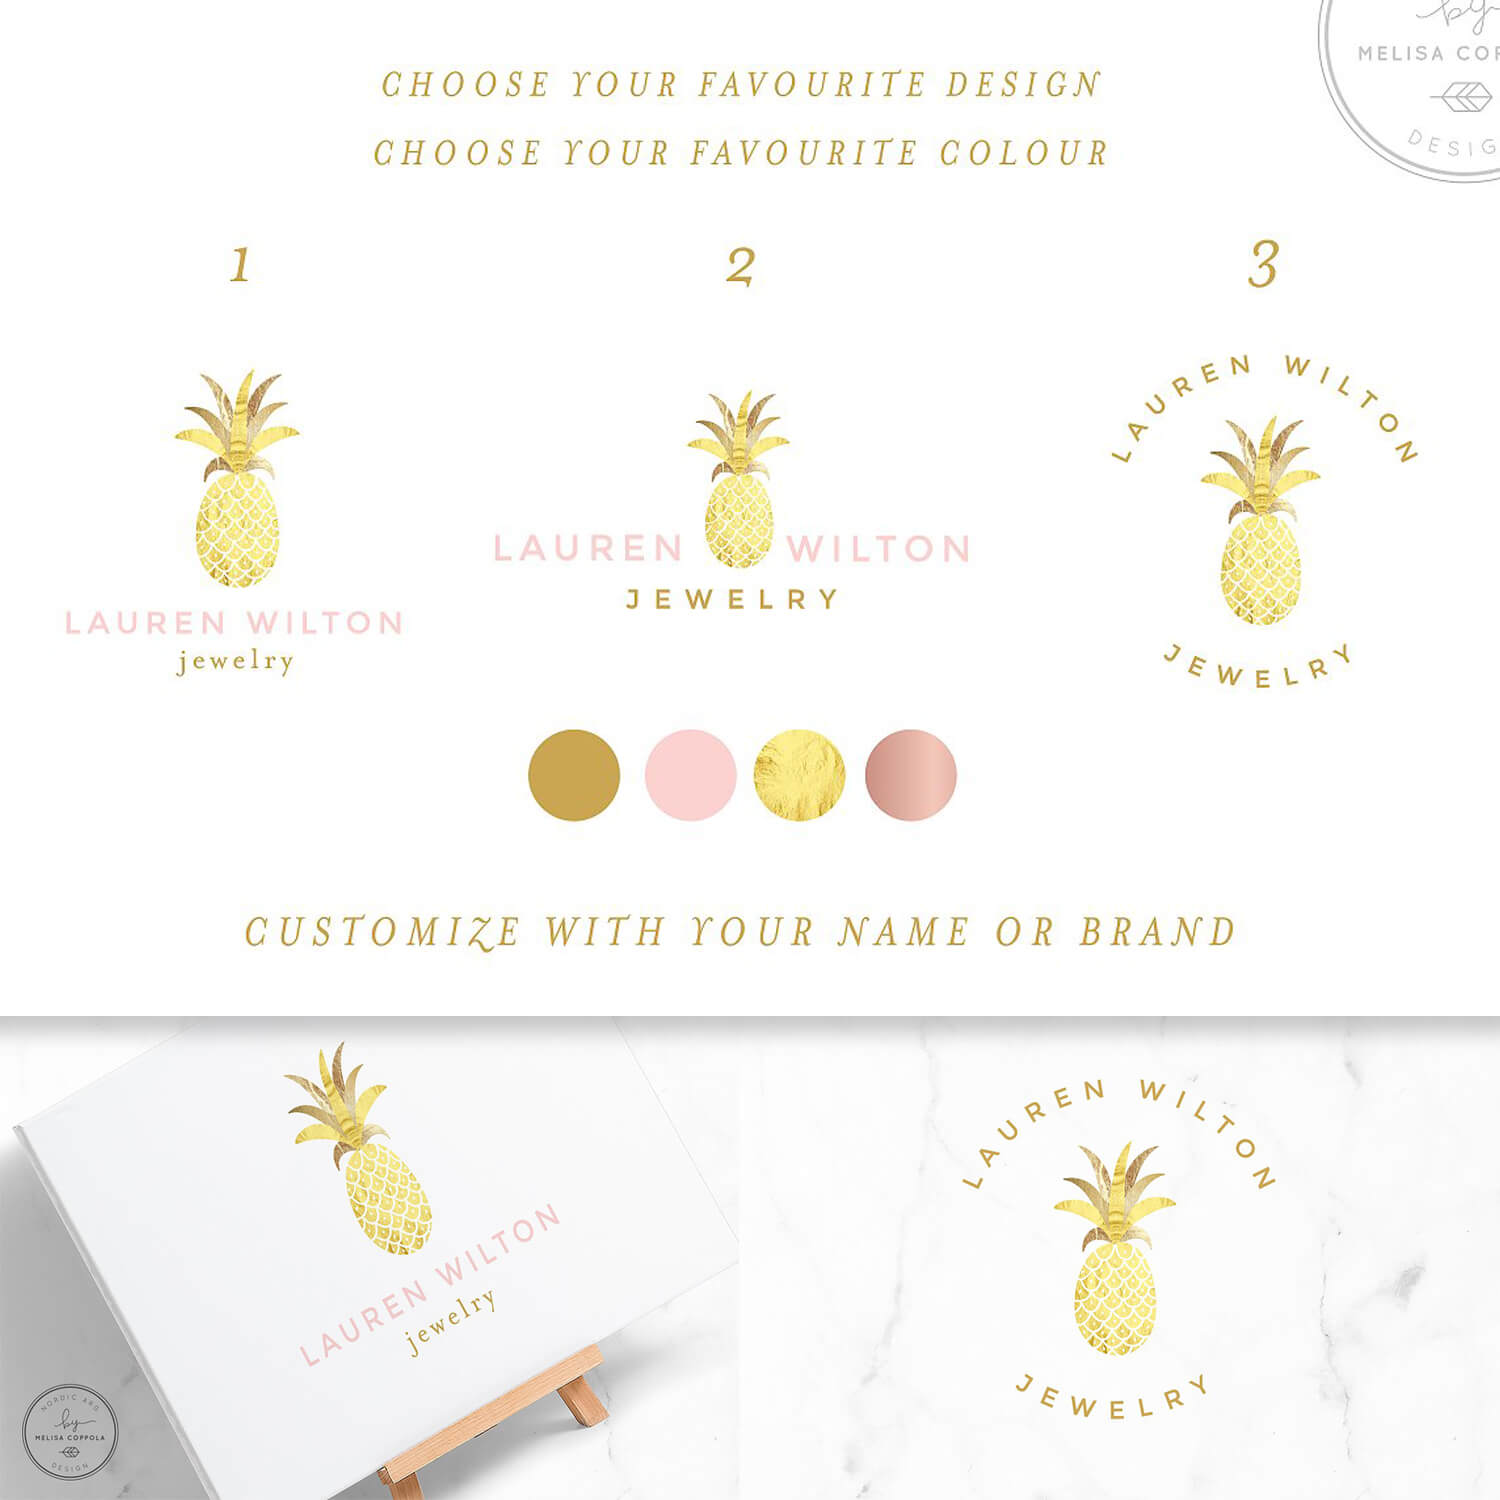 Possibility to choose one of the golden pineapple logo designs.